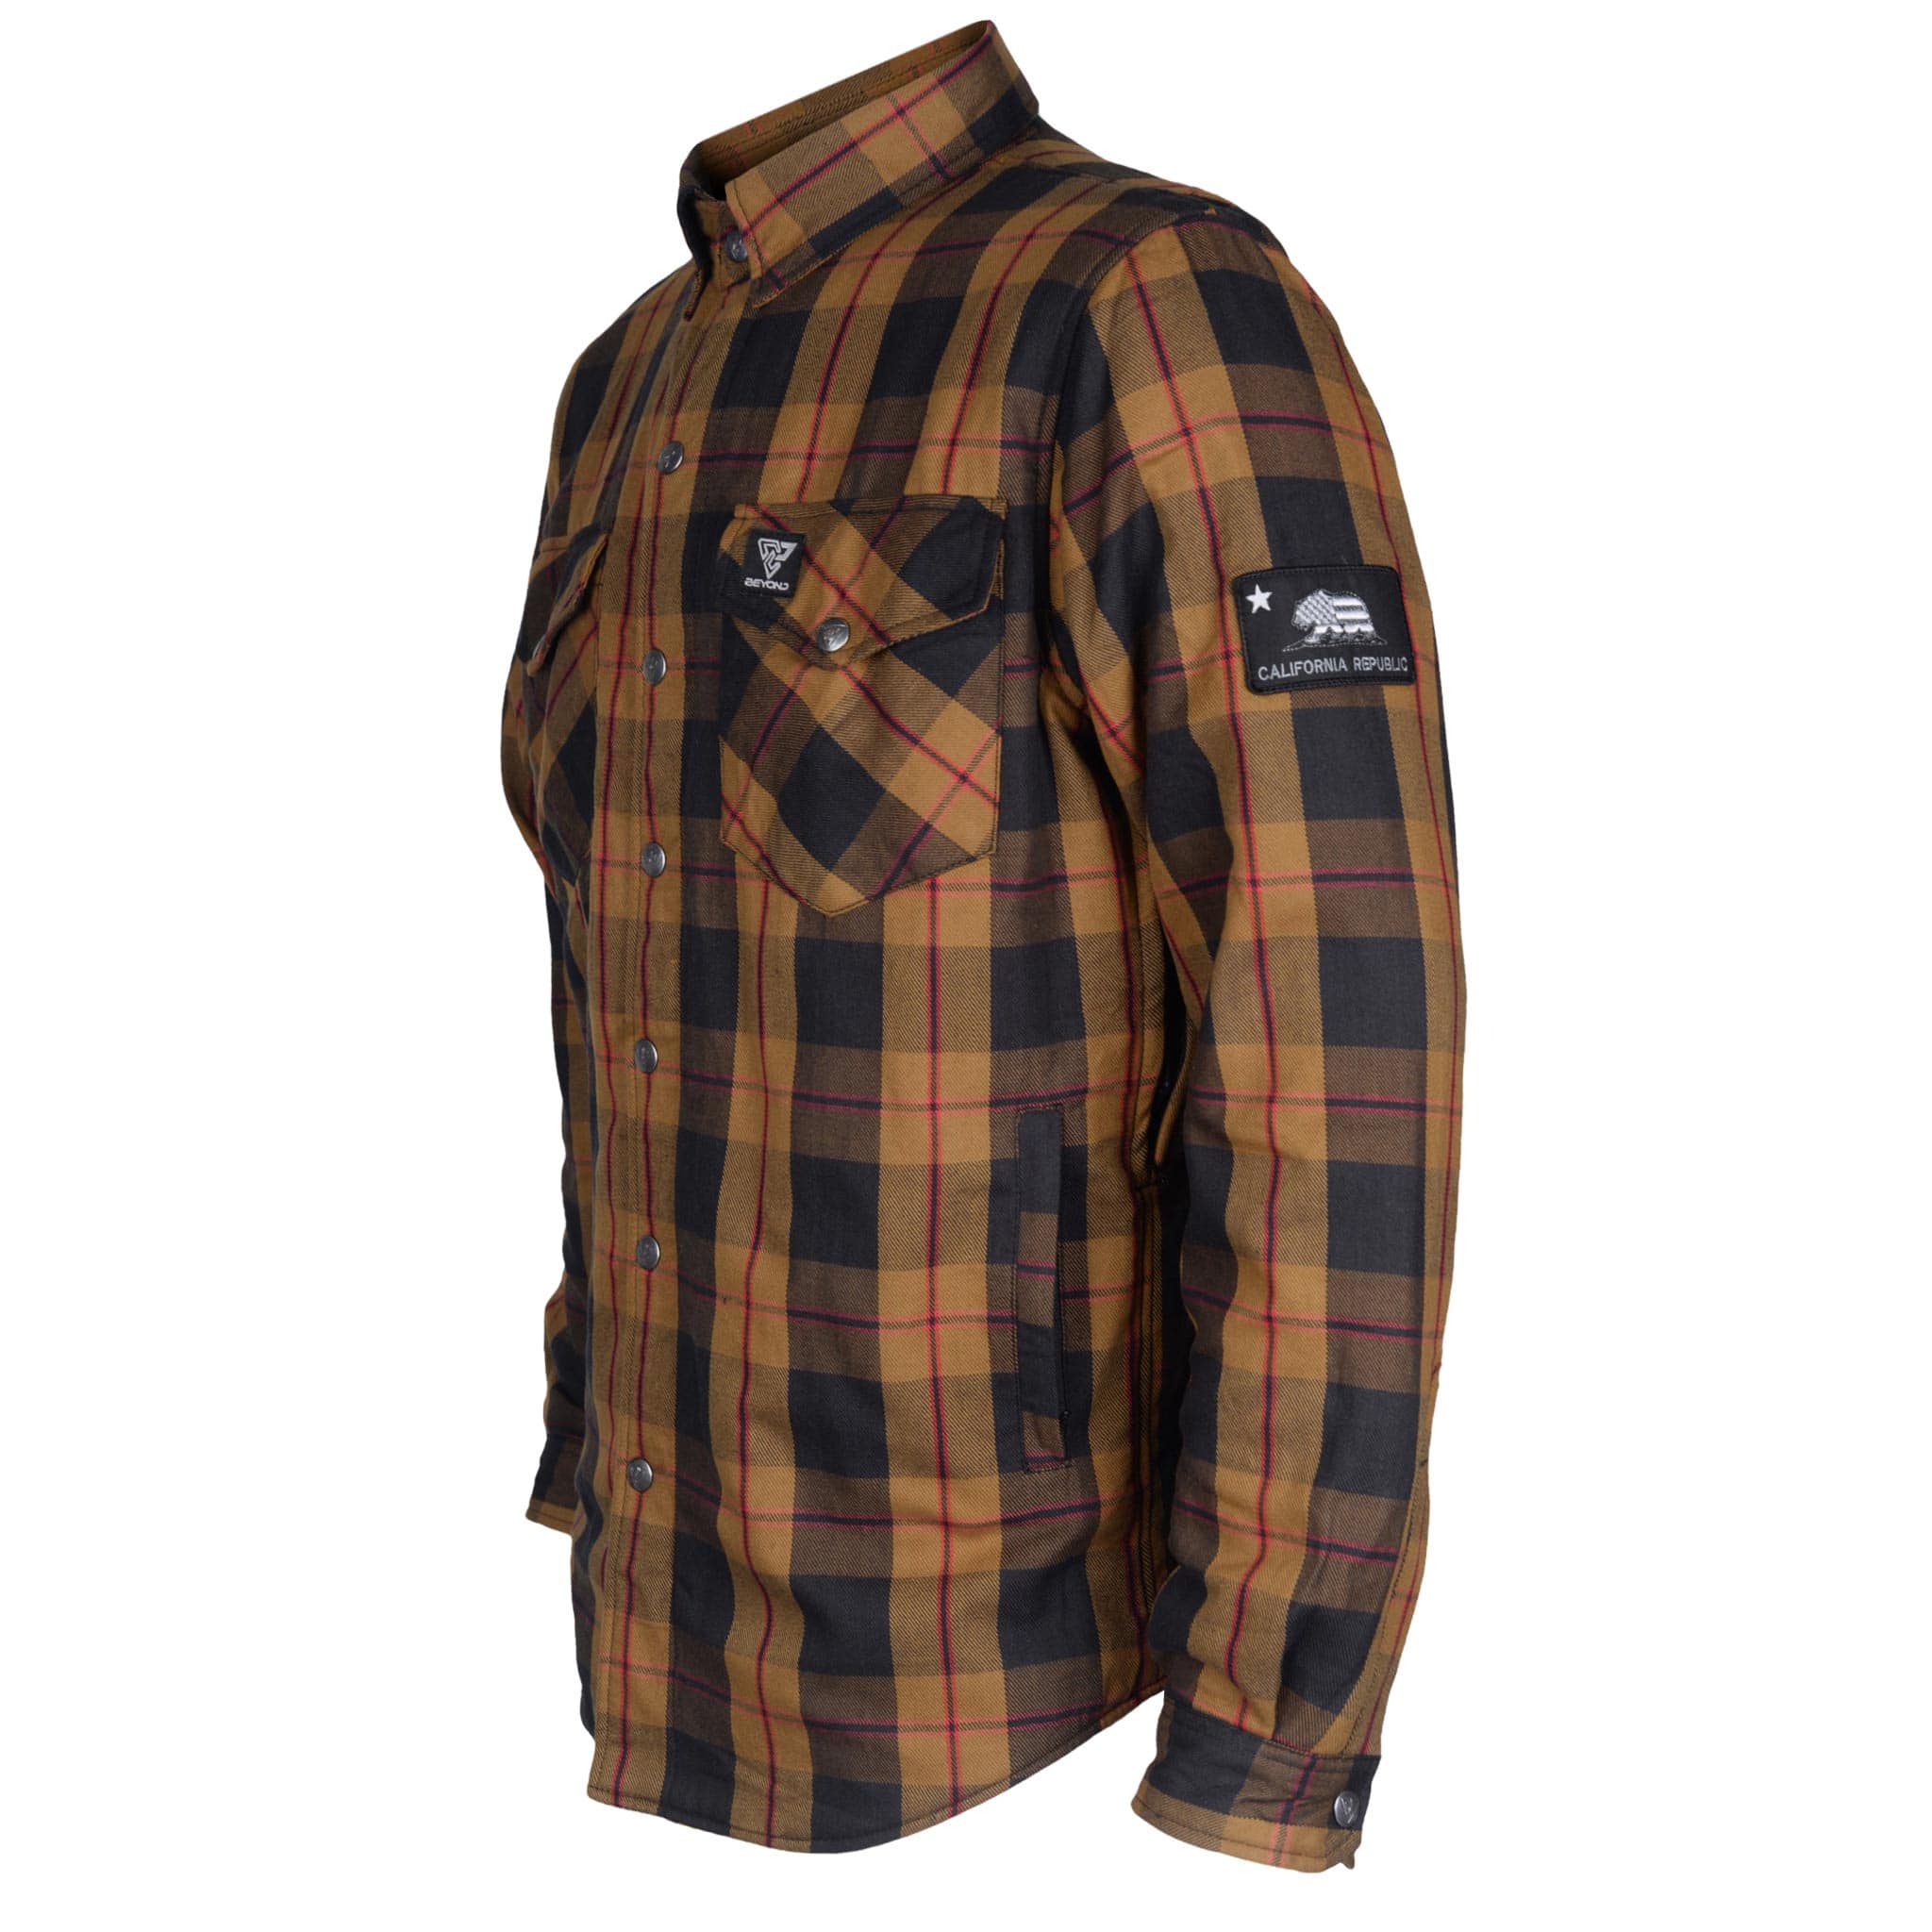 Protective Flannel Shirt "Wild West" - Brown, Black, Red with Pads